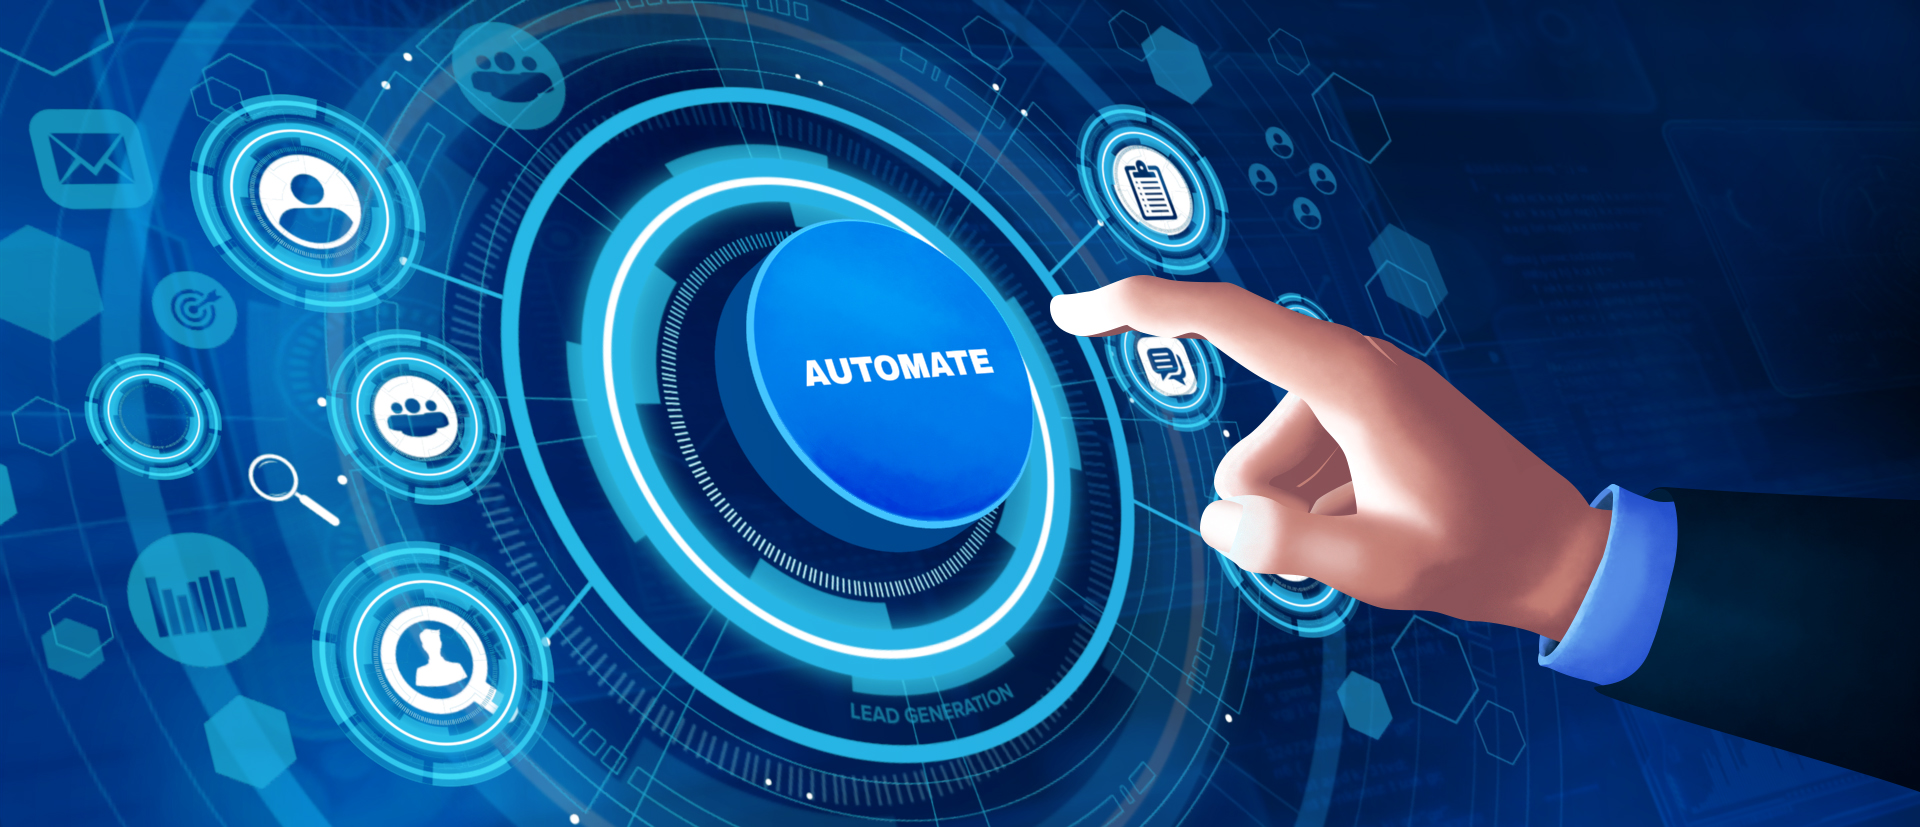 5 Reasons Not to Over-Automate Your Sales and Lead Generation